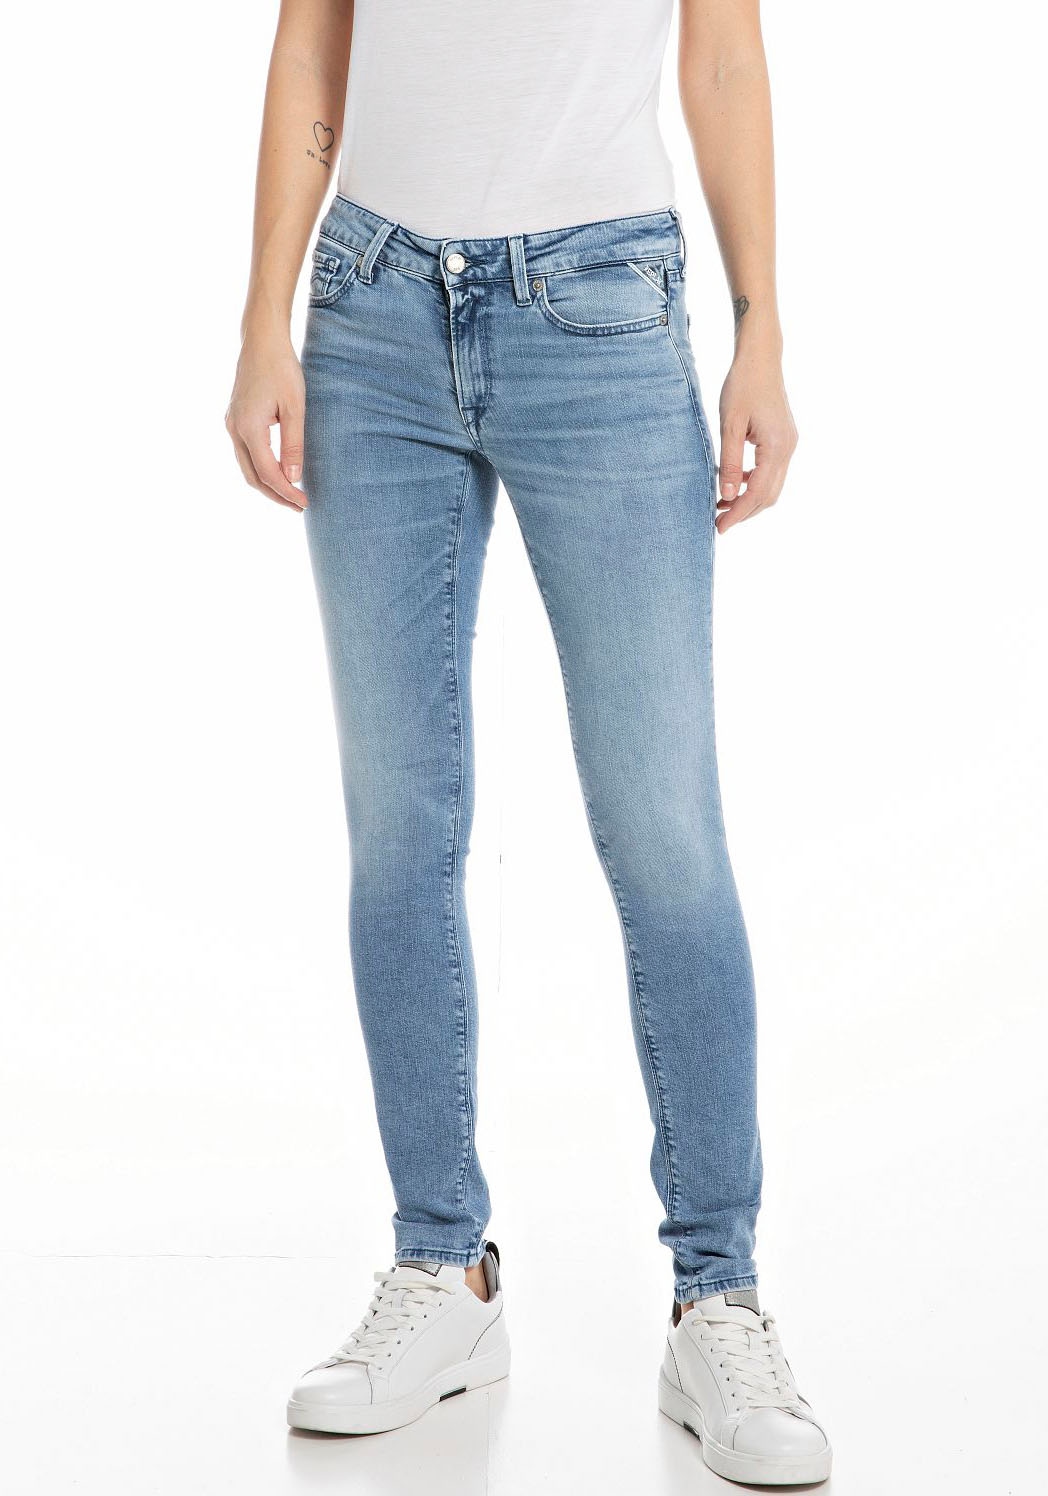 Replay 5-Pocket-Jeans »NEW LUZ«, in Ankle-Länge